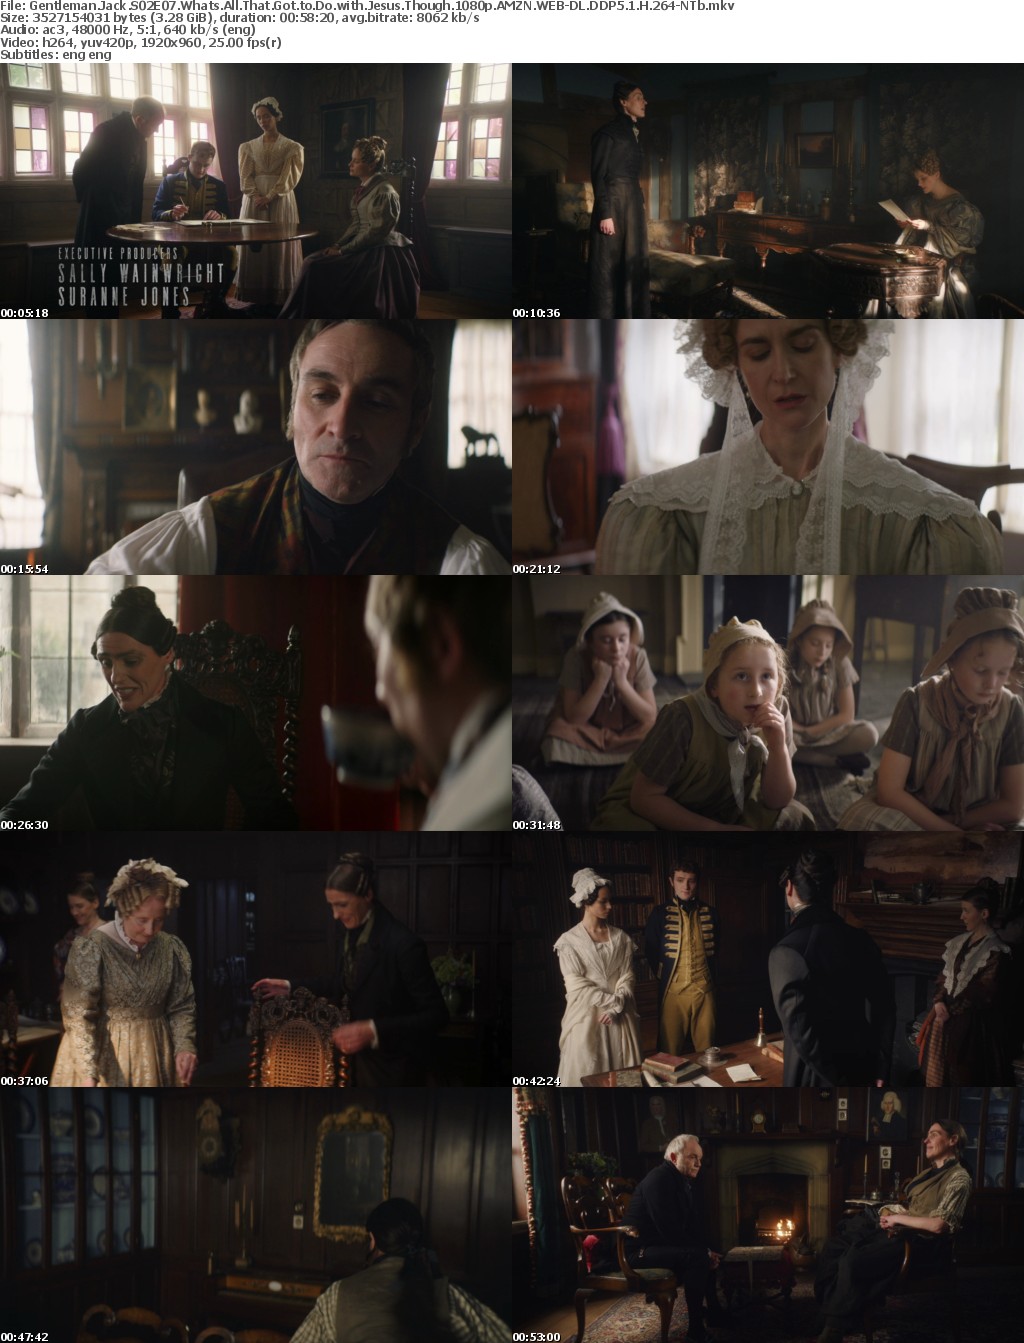 Gentleman Jack S02E07 Whats All That Got to Do with Jesus Though 1080p AMZN WEBRip DDP5 1 x264-NTb